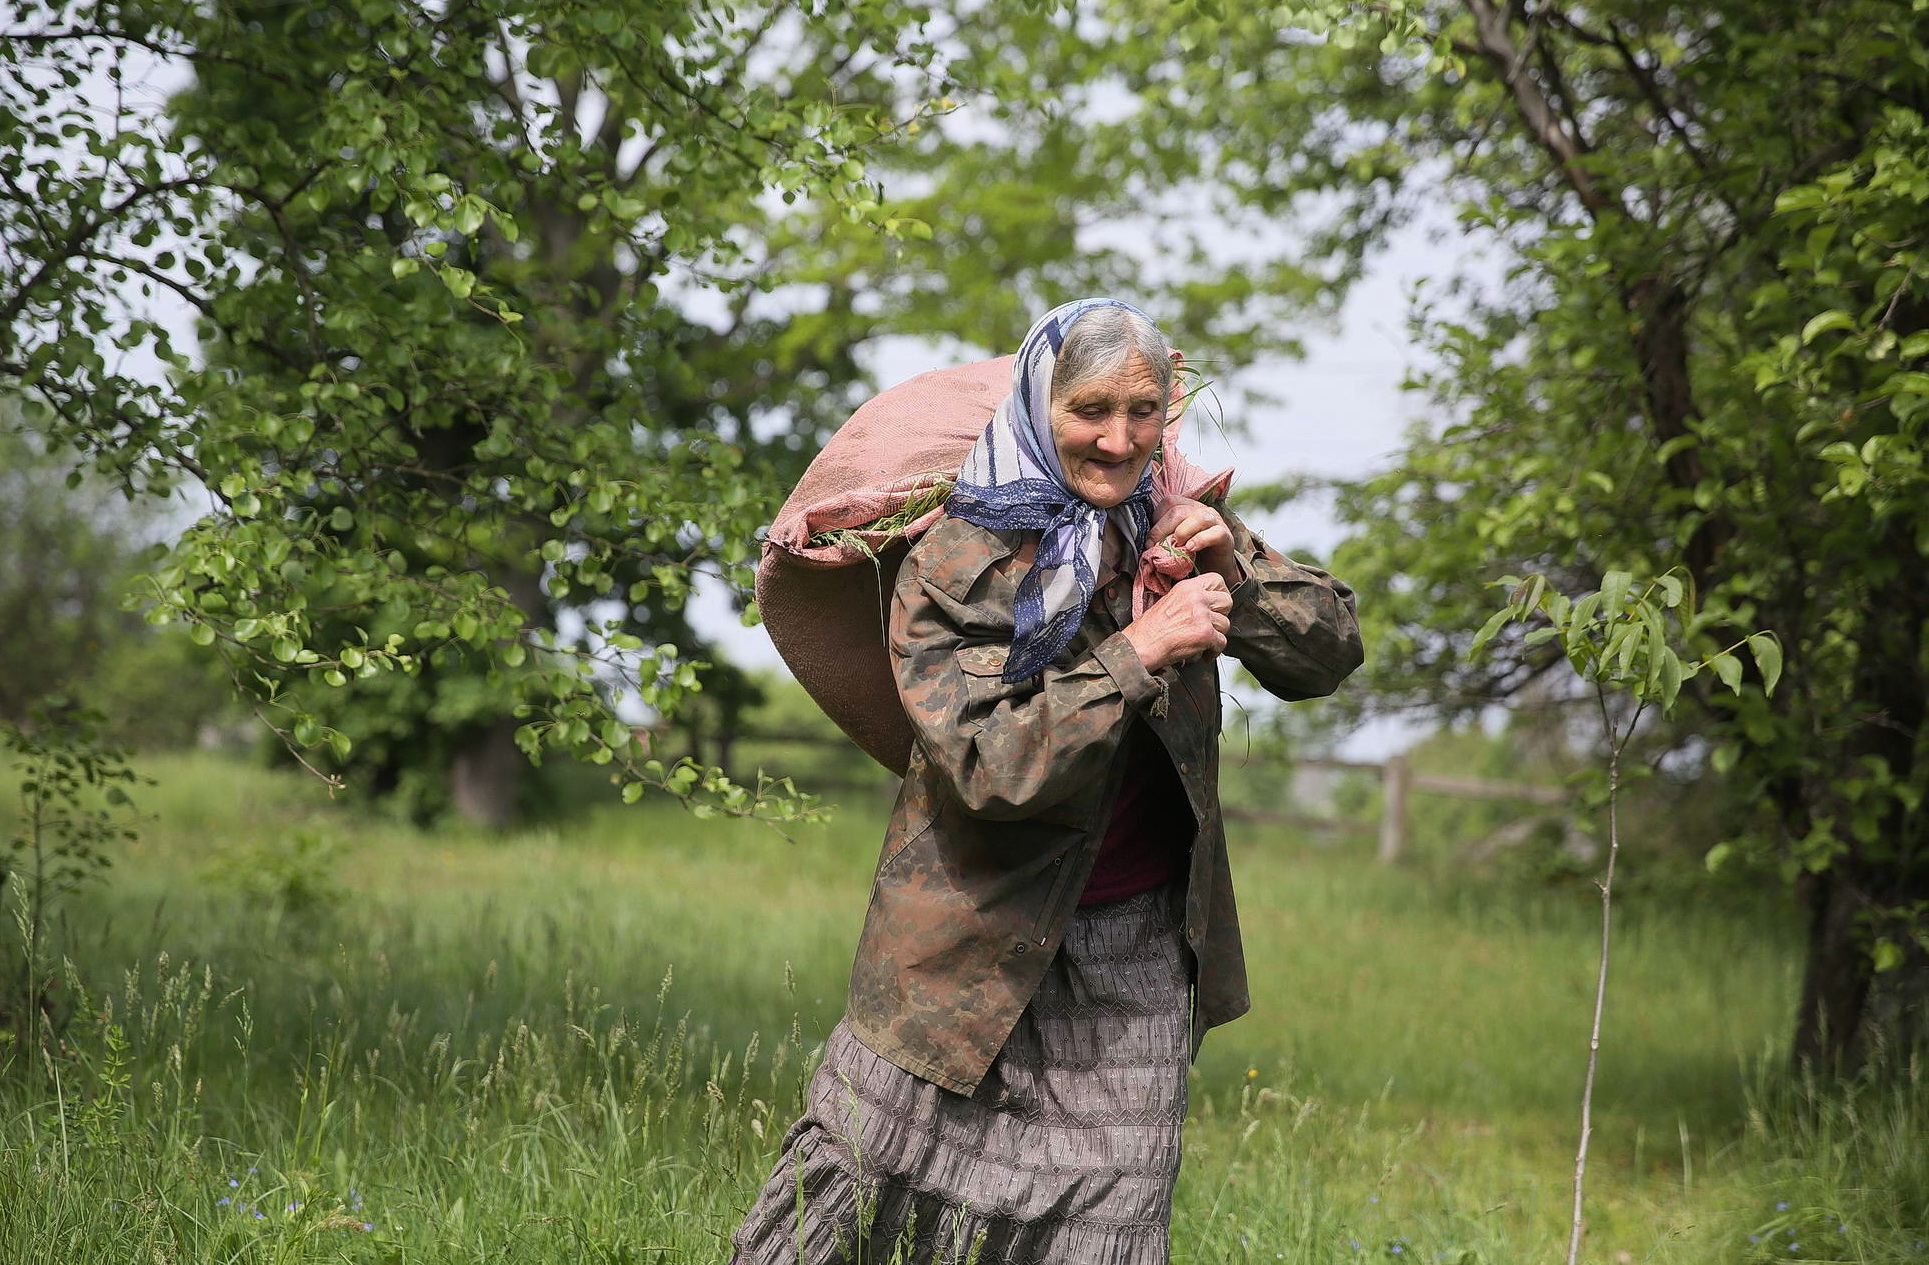 Oleksandra Vaseiko carries grass to feed her cow in her yard in the village of Sokil in Volyn Oblast.